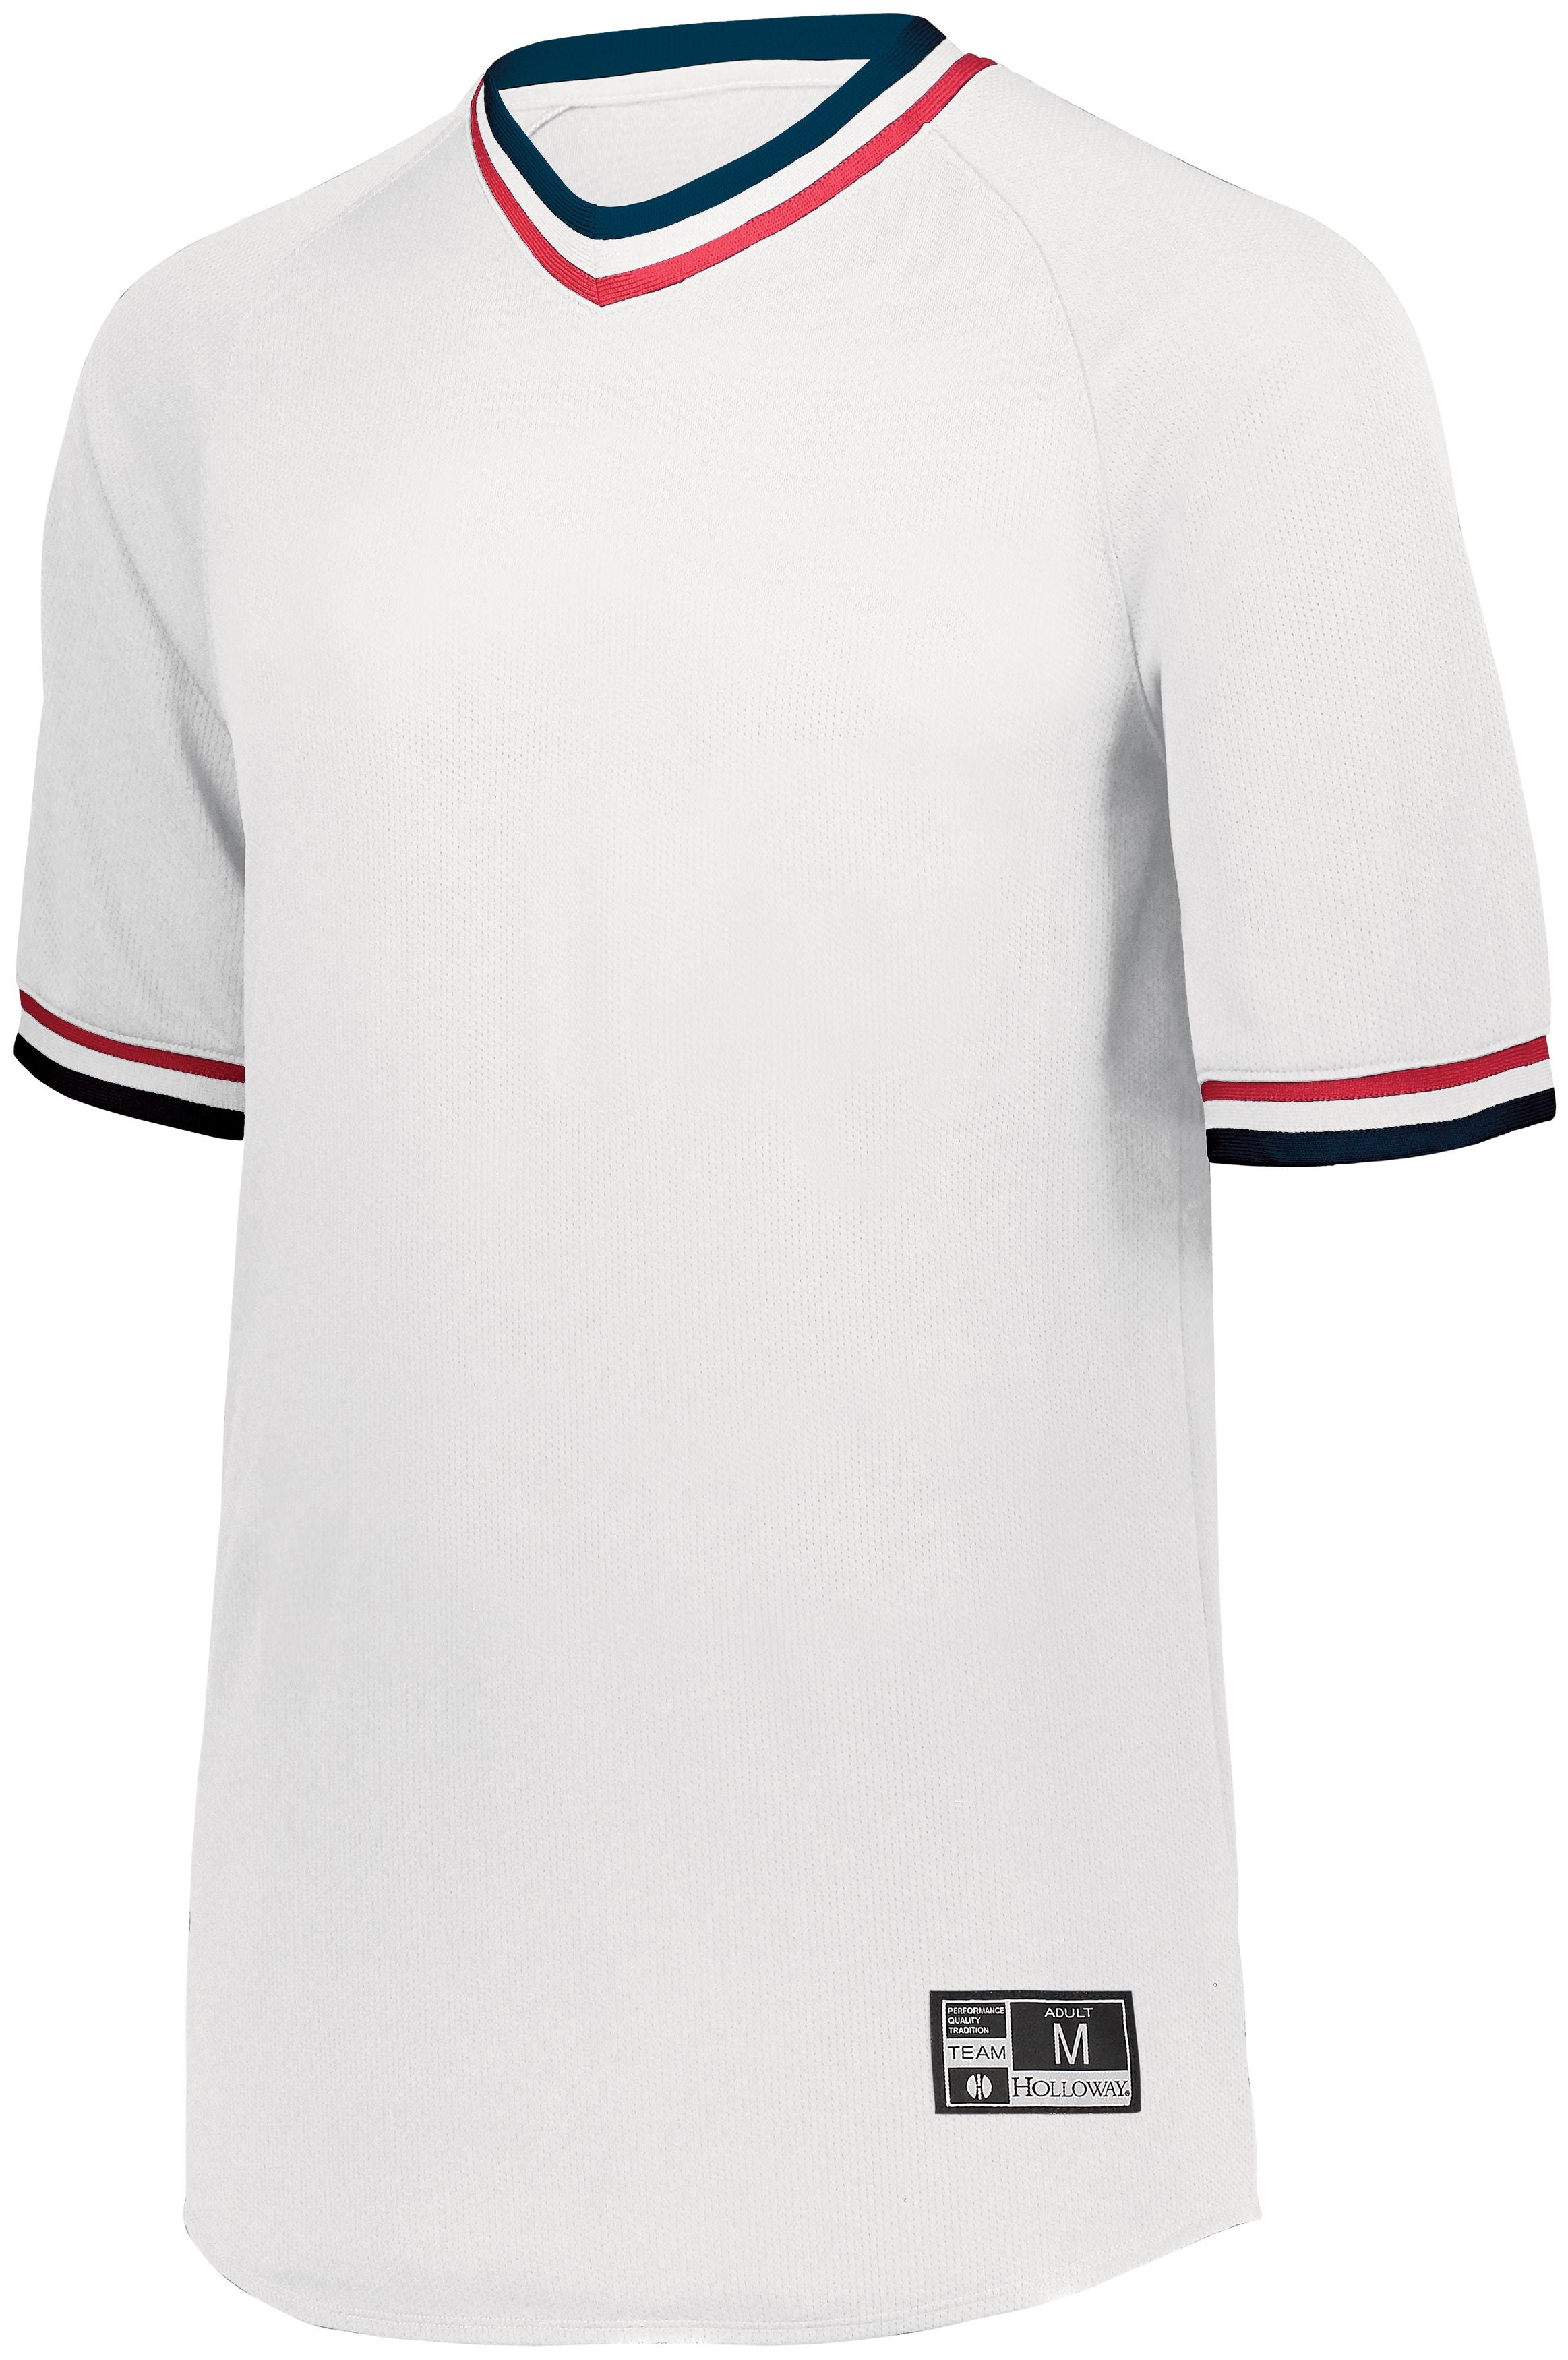 Holloway Retro V-Neck Baseball Jersey in White/Navy/Scarlet  -Part of the Adult, Adult-Jersey, Baseball, Holloway, Shirts, All-Sports, All-Sports-1 product lines at KanaleyCreations.com